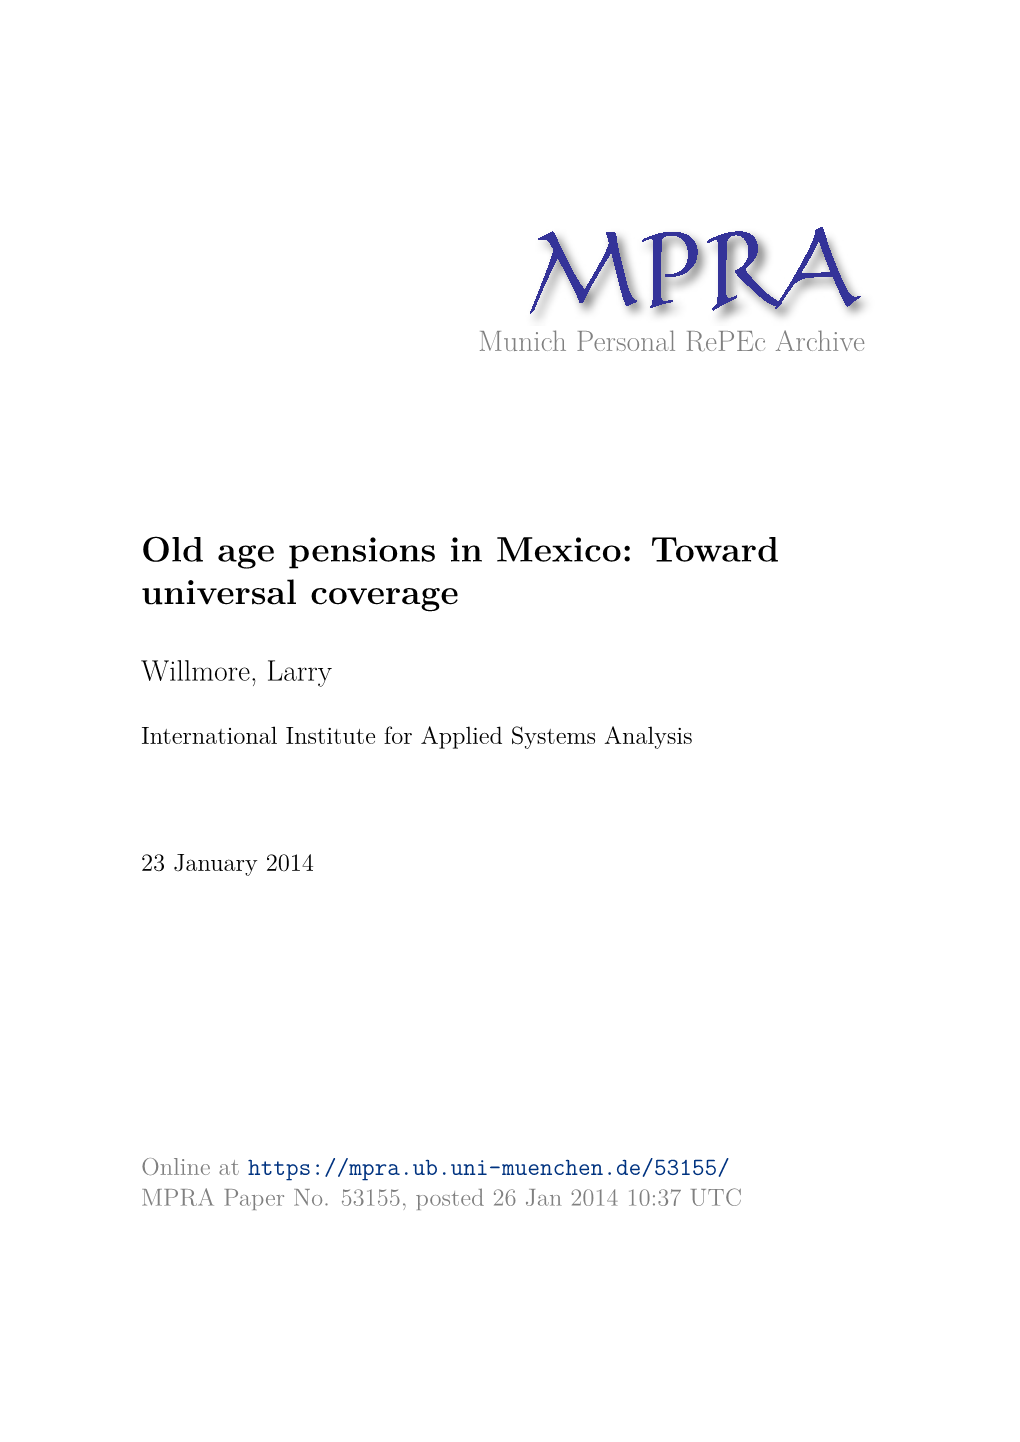 Old Age Pensions in Mexico: Toward Universal Coverage